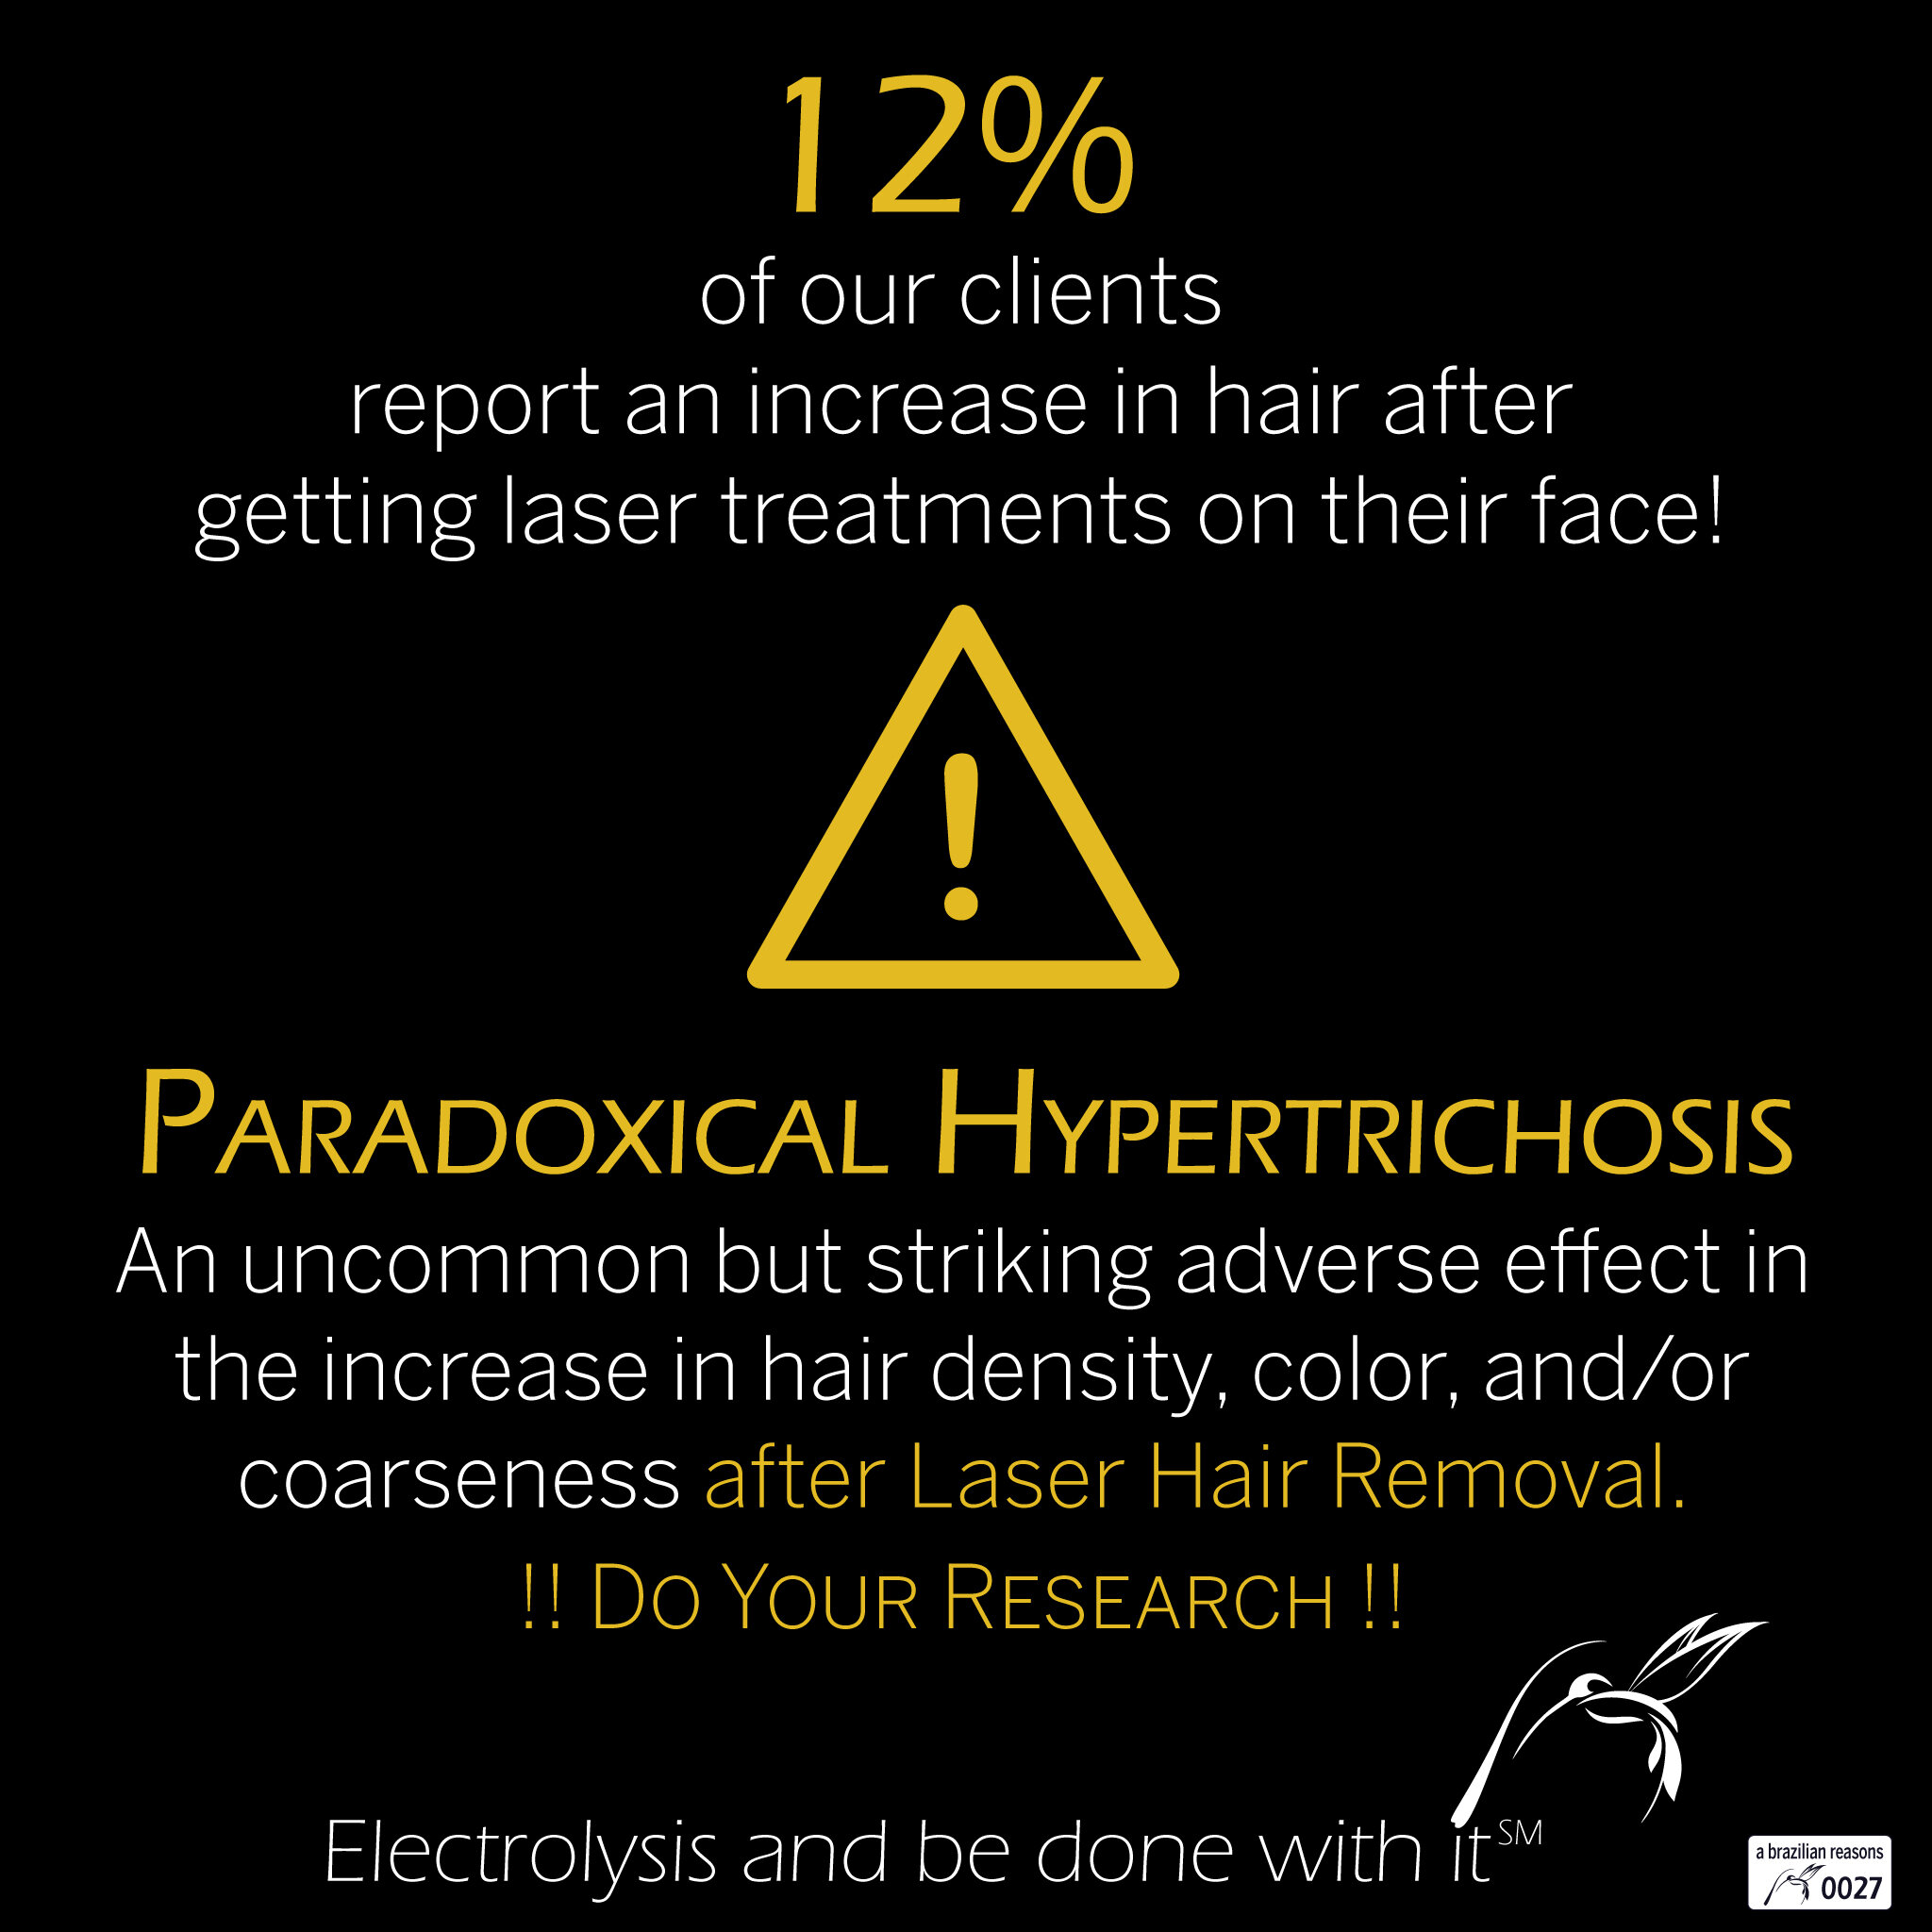 Key facts about laser — Beware of Laser Hair Removal